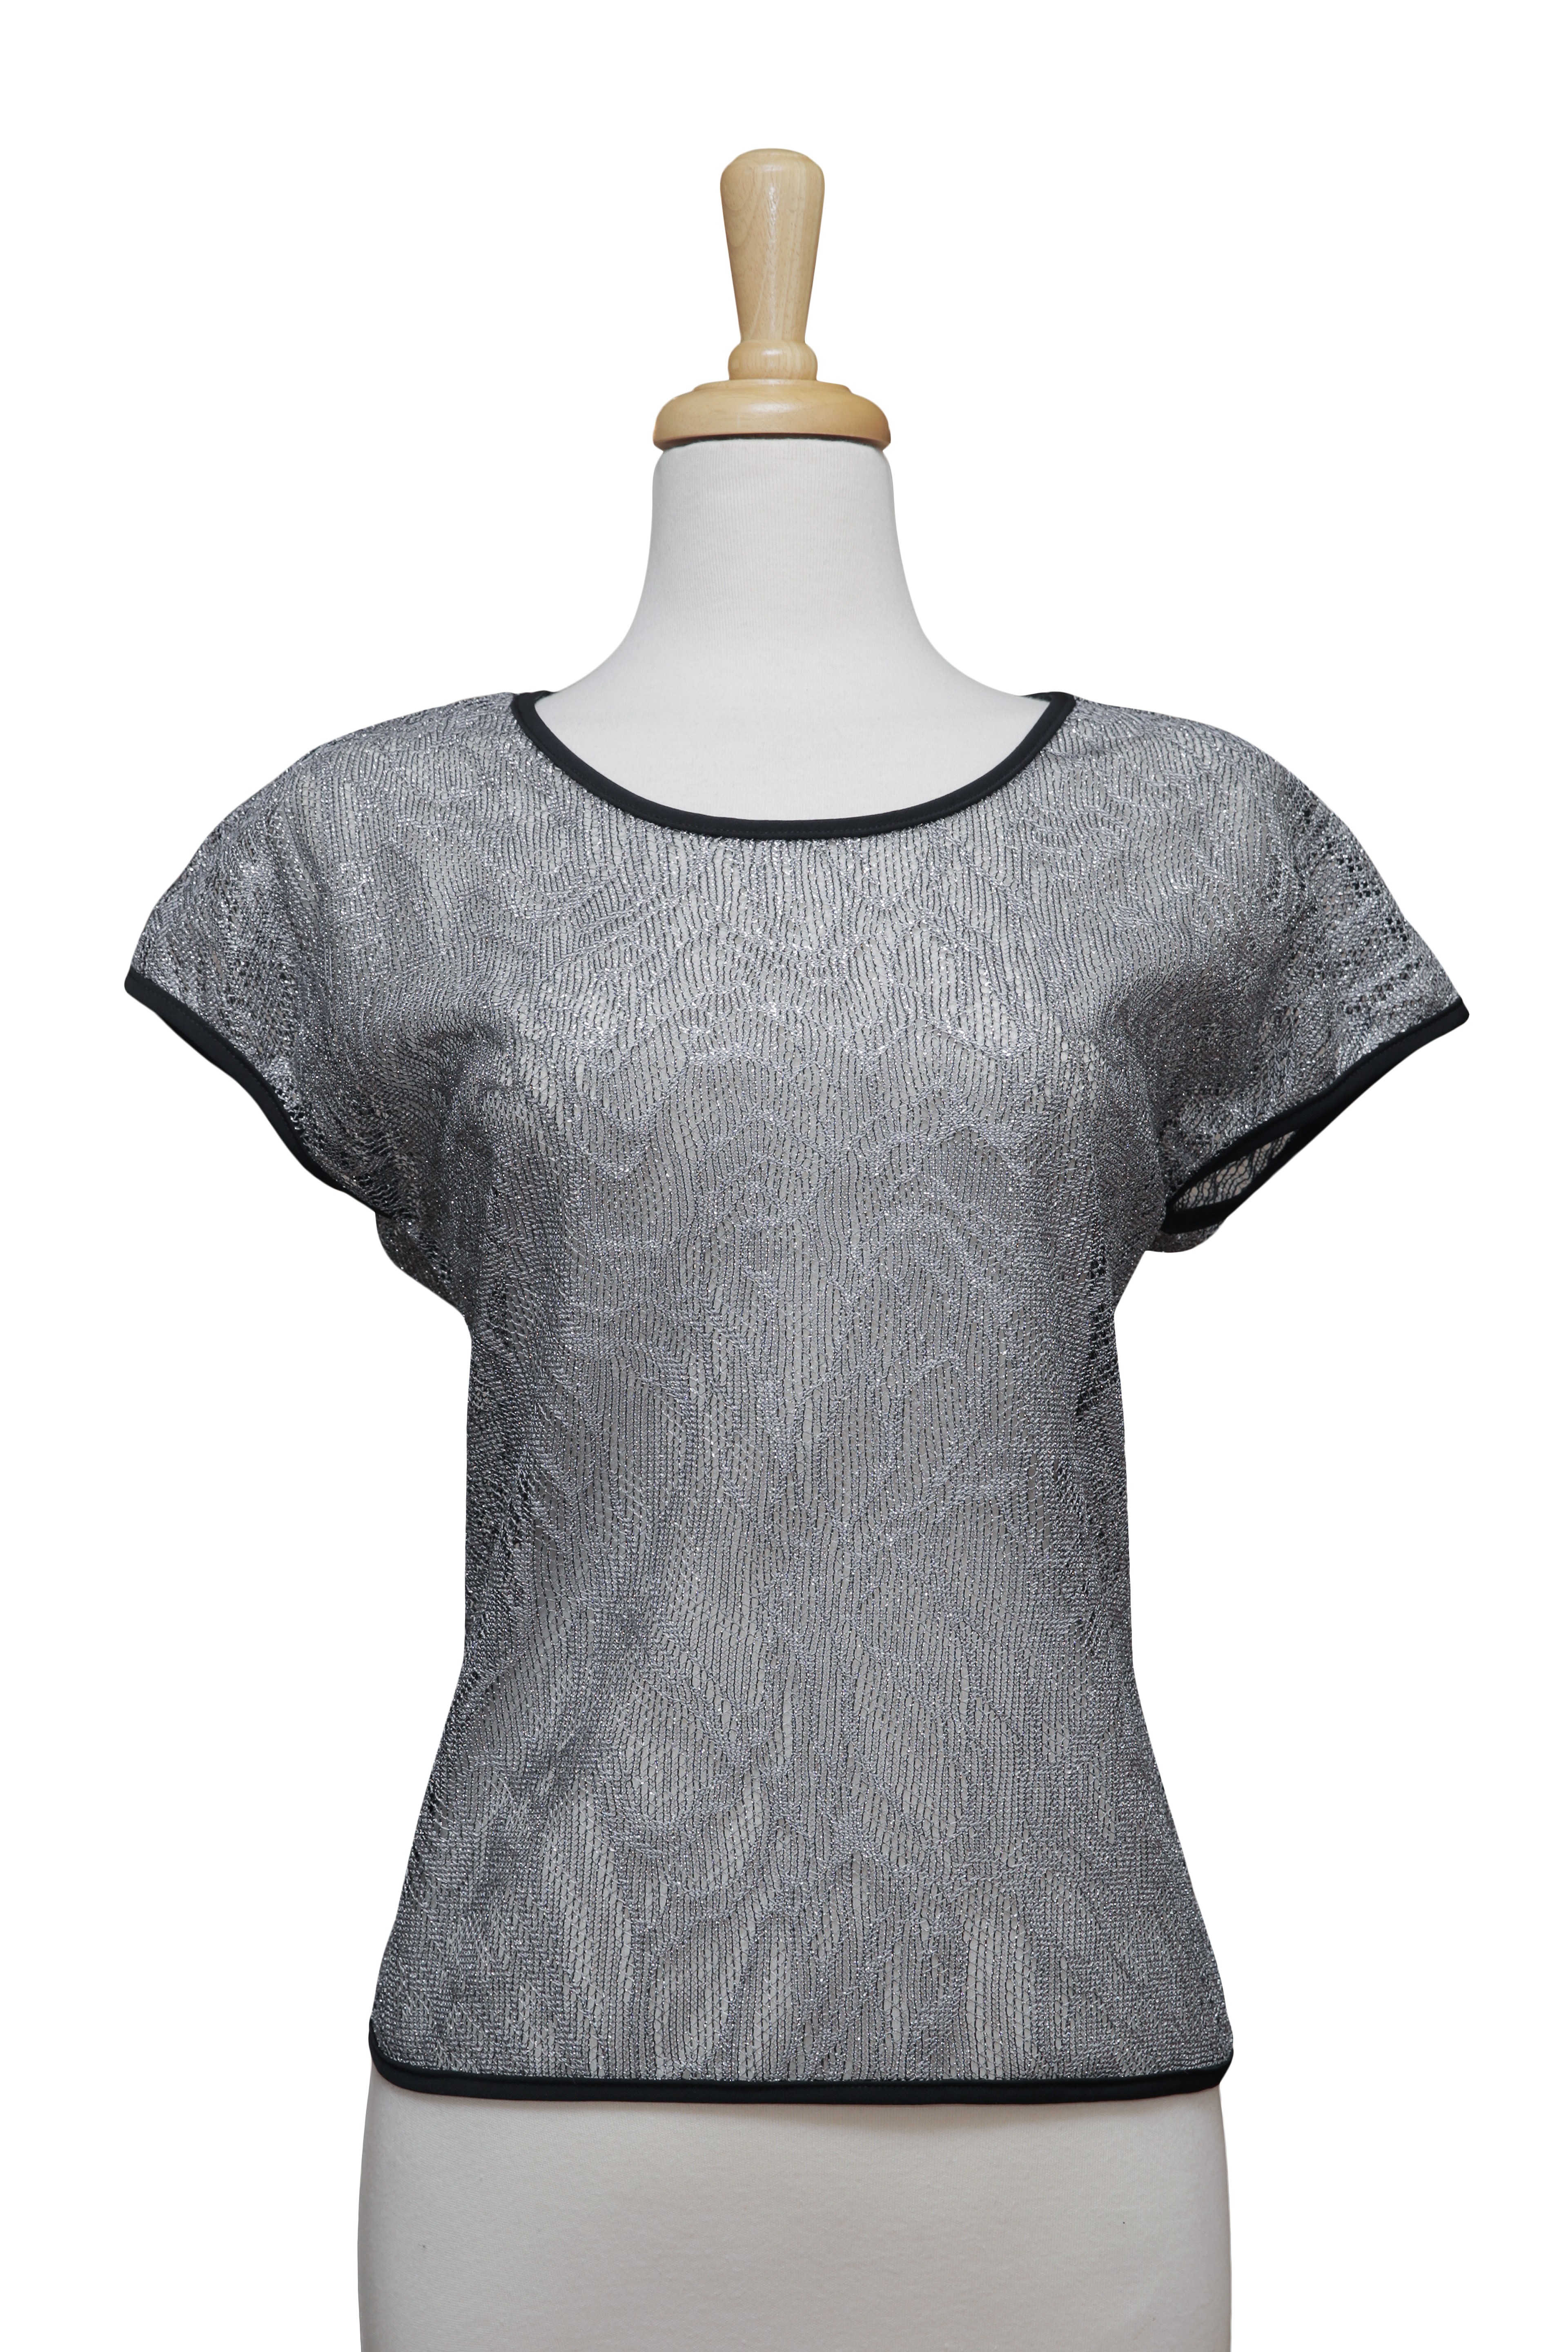 Plus Size Metallic Silver Lace Knit  Short Sleeve Top